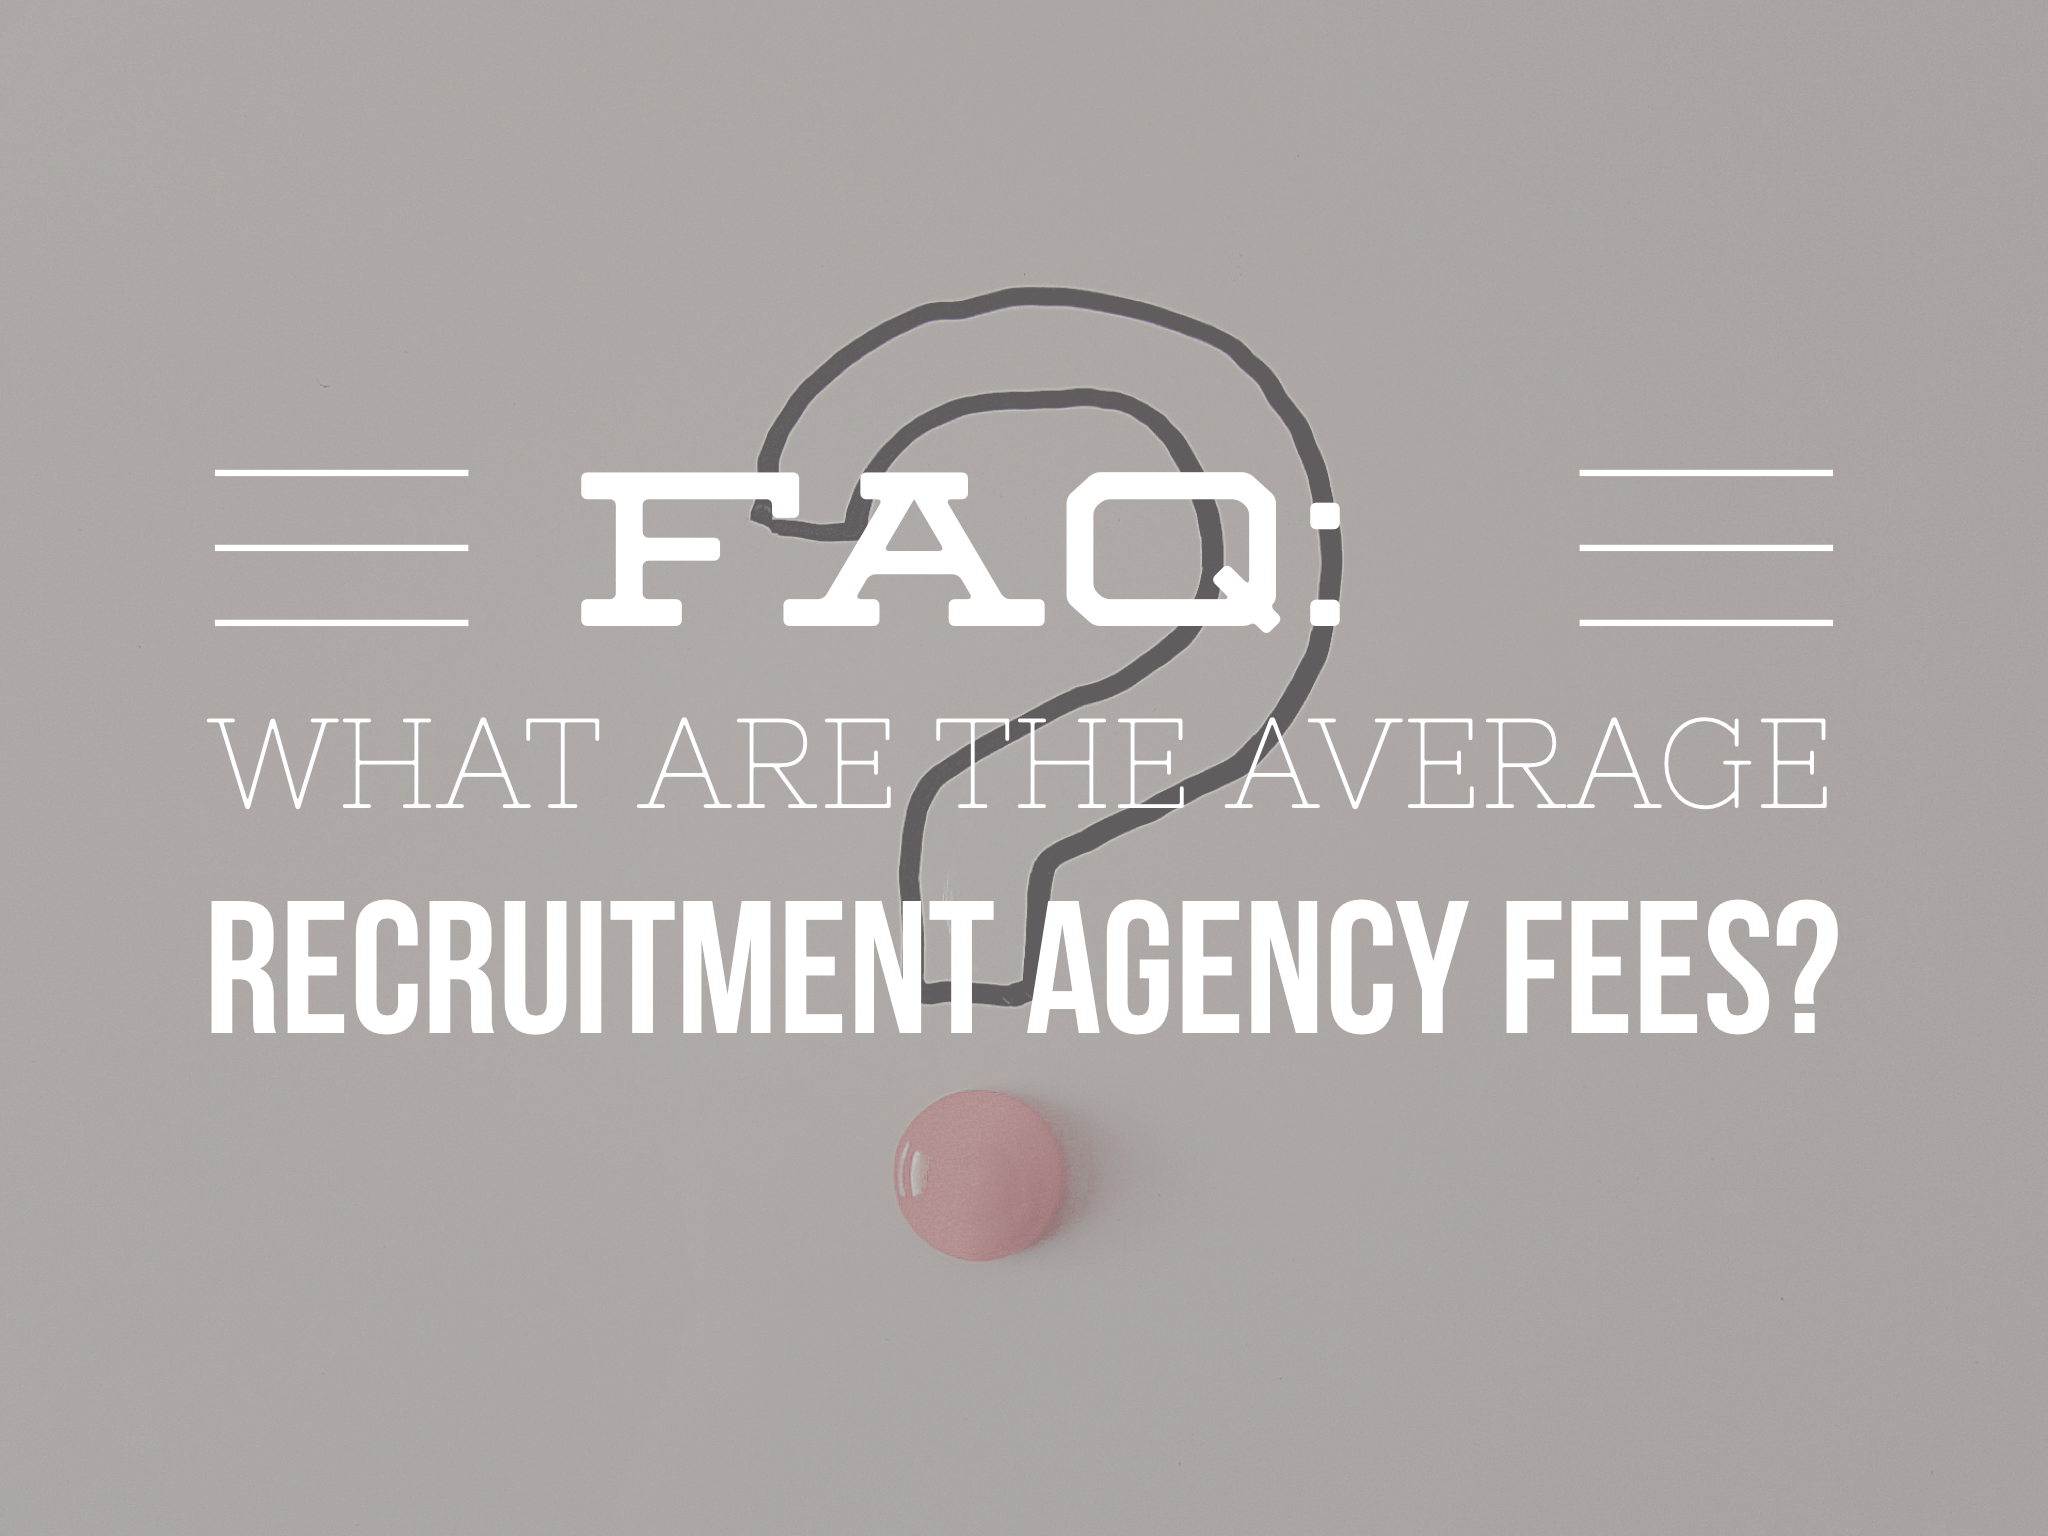 FAQ: What are the Average Recruitment Agency Fees?